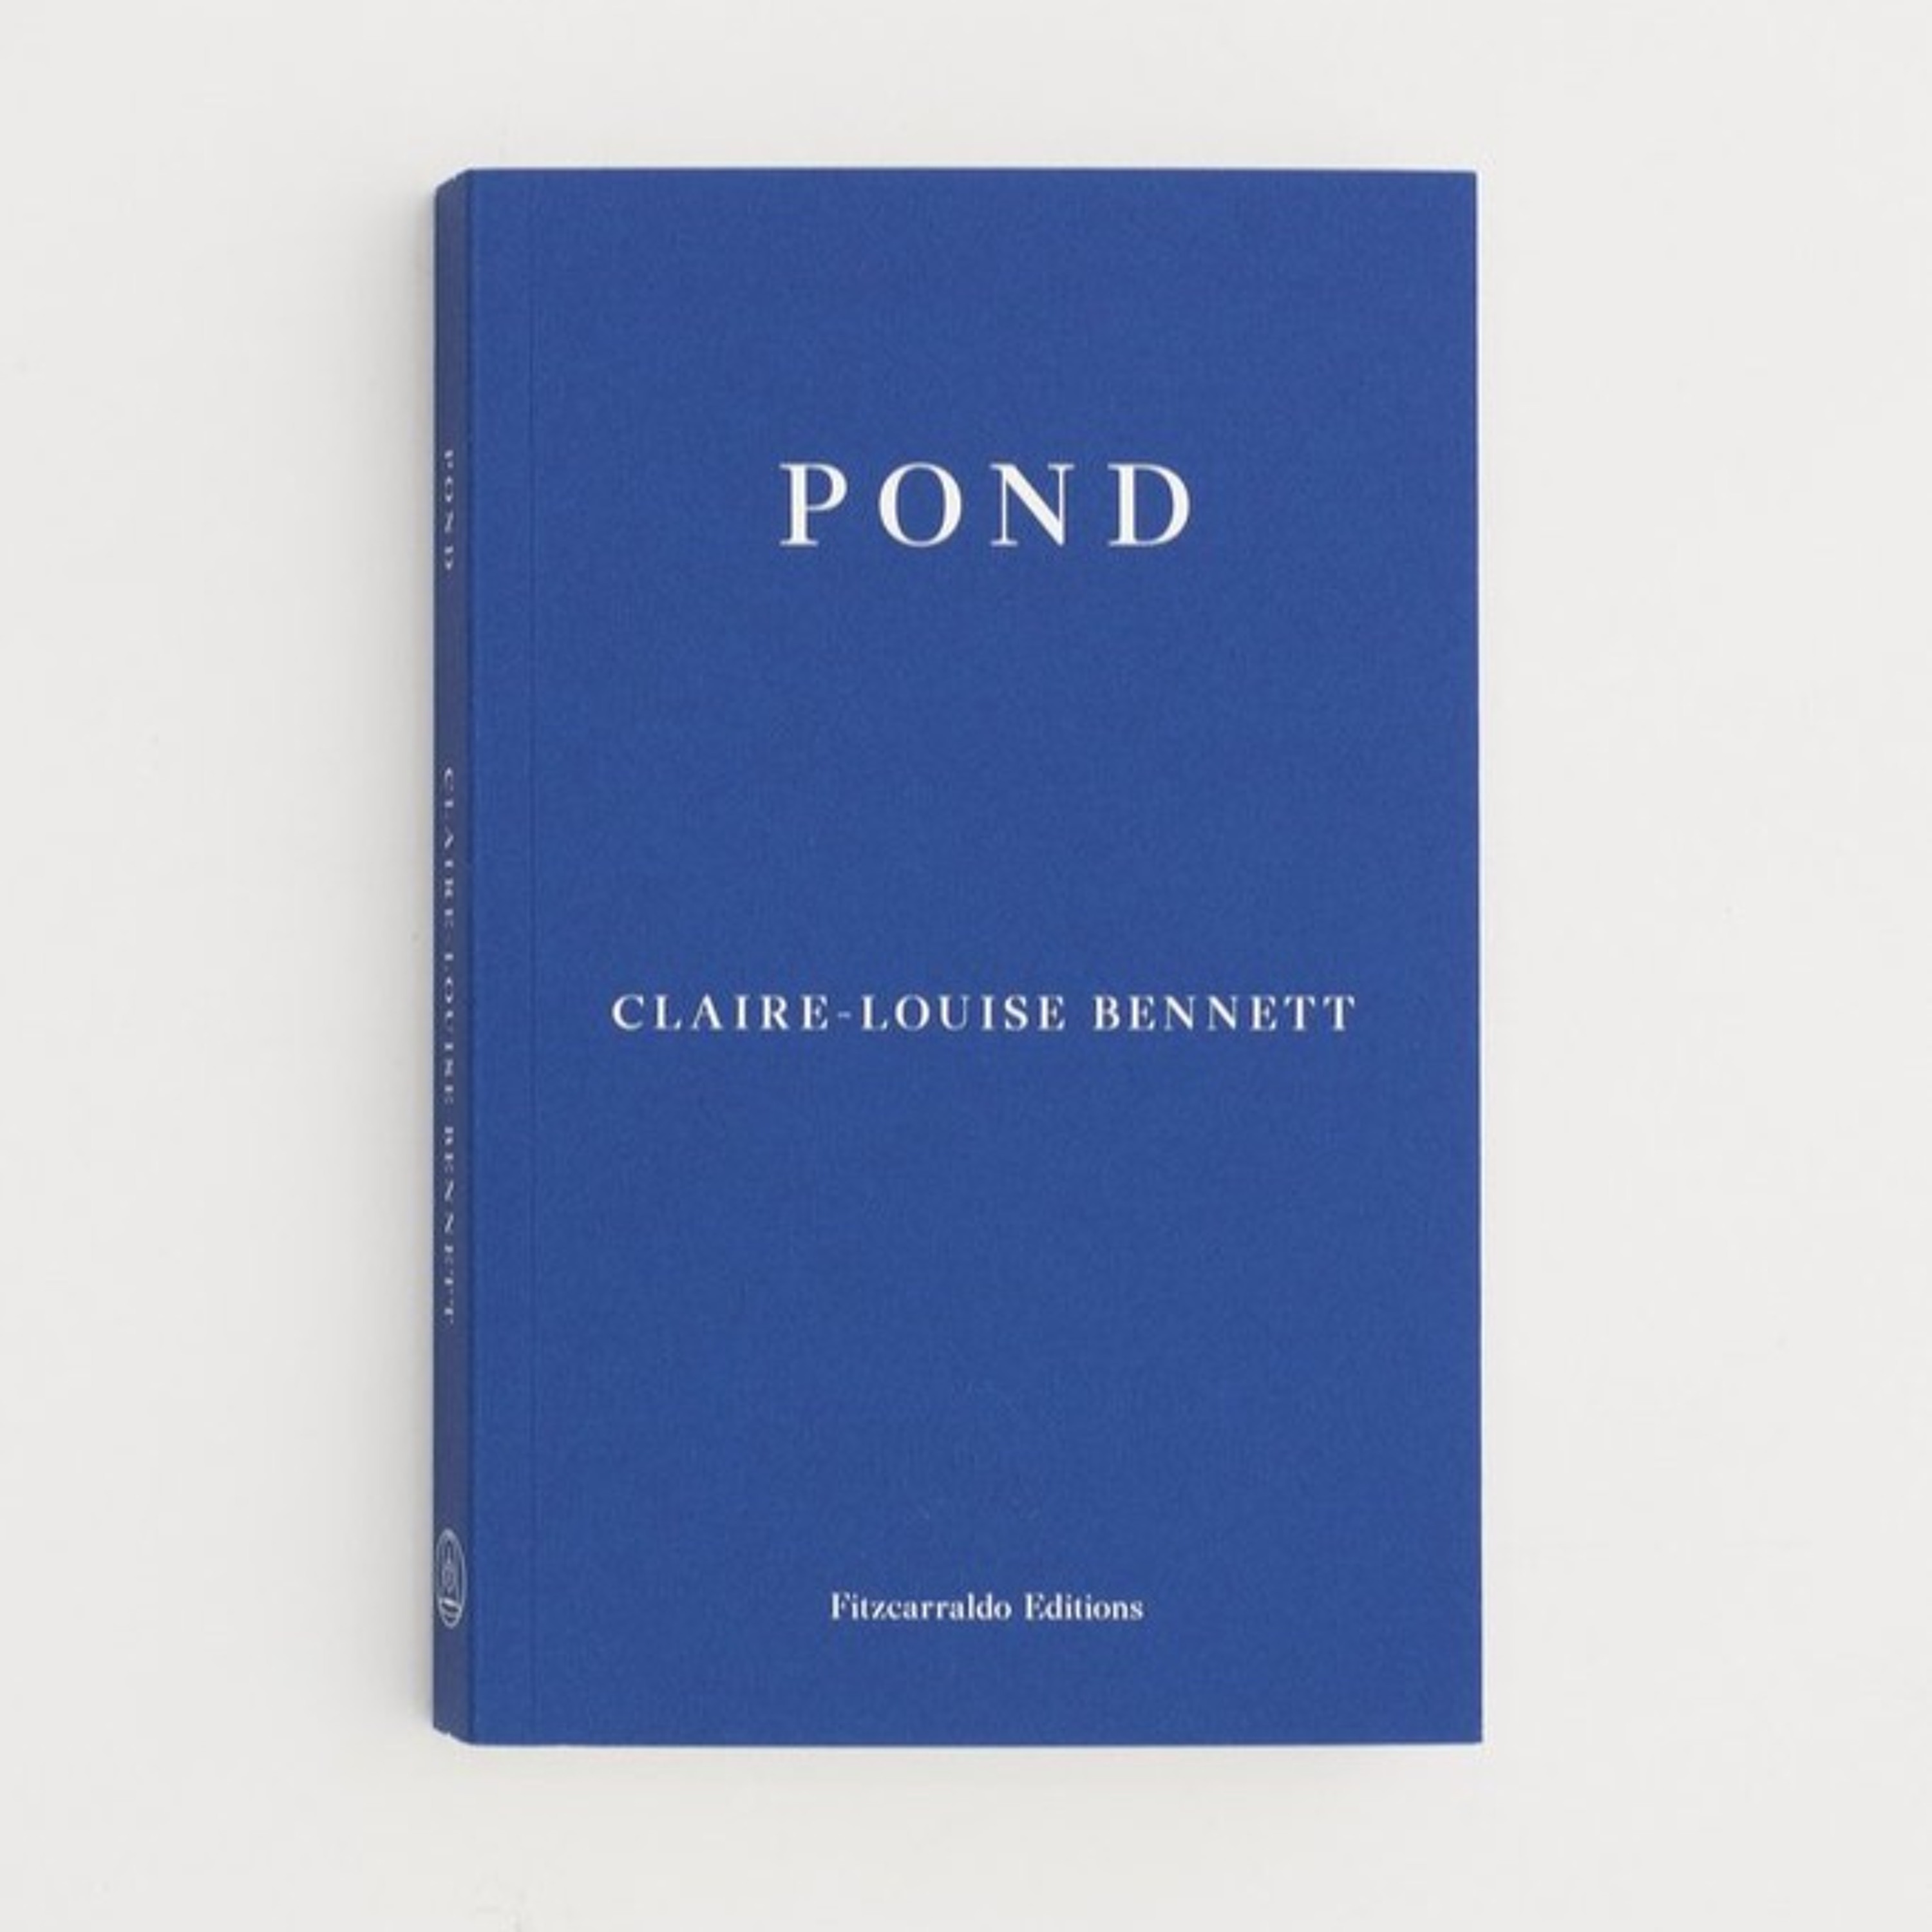 An extract from Pond, read by Claire-Louise Bennett